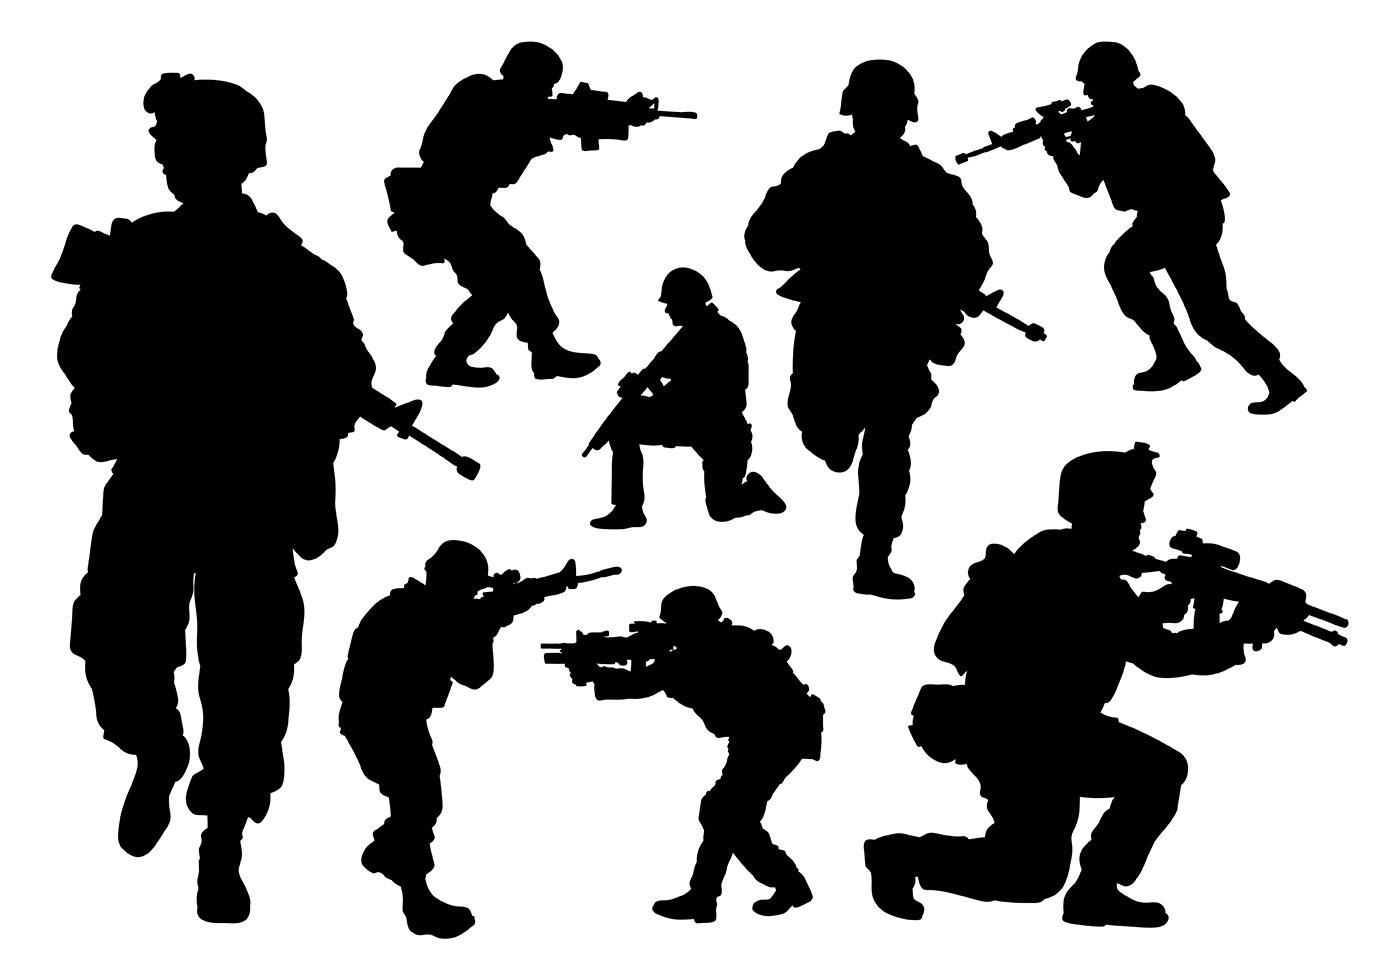 military clipart collection